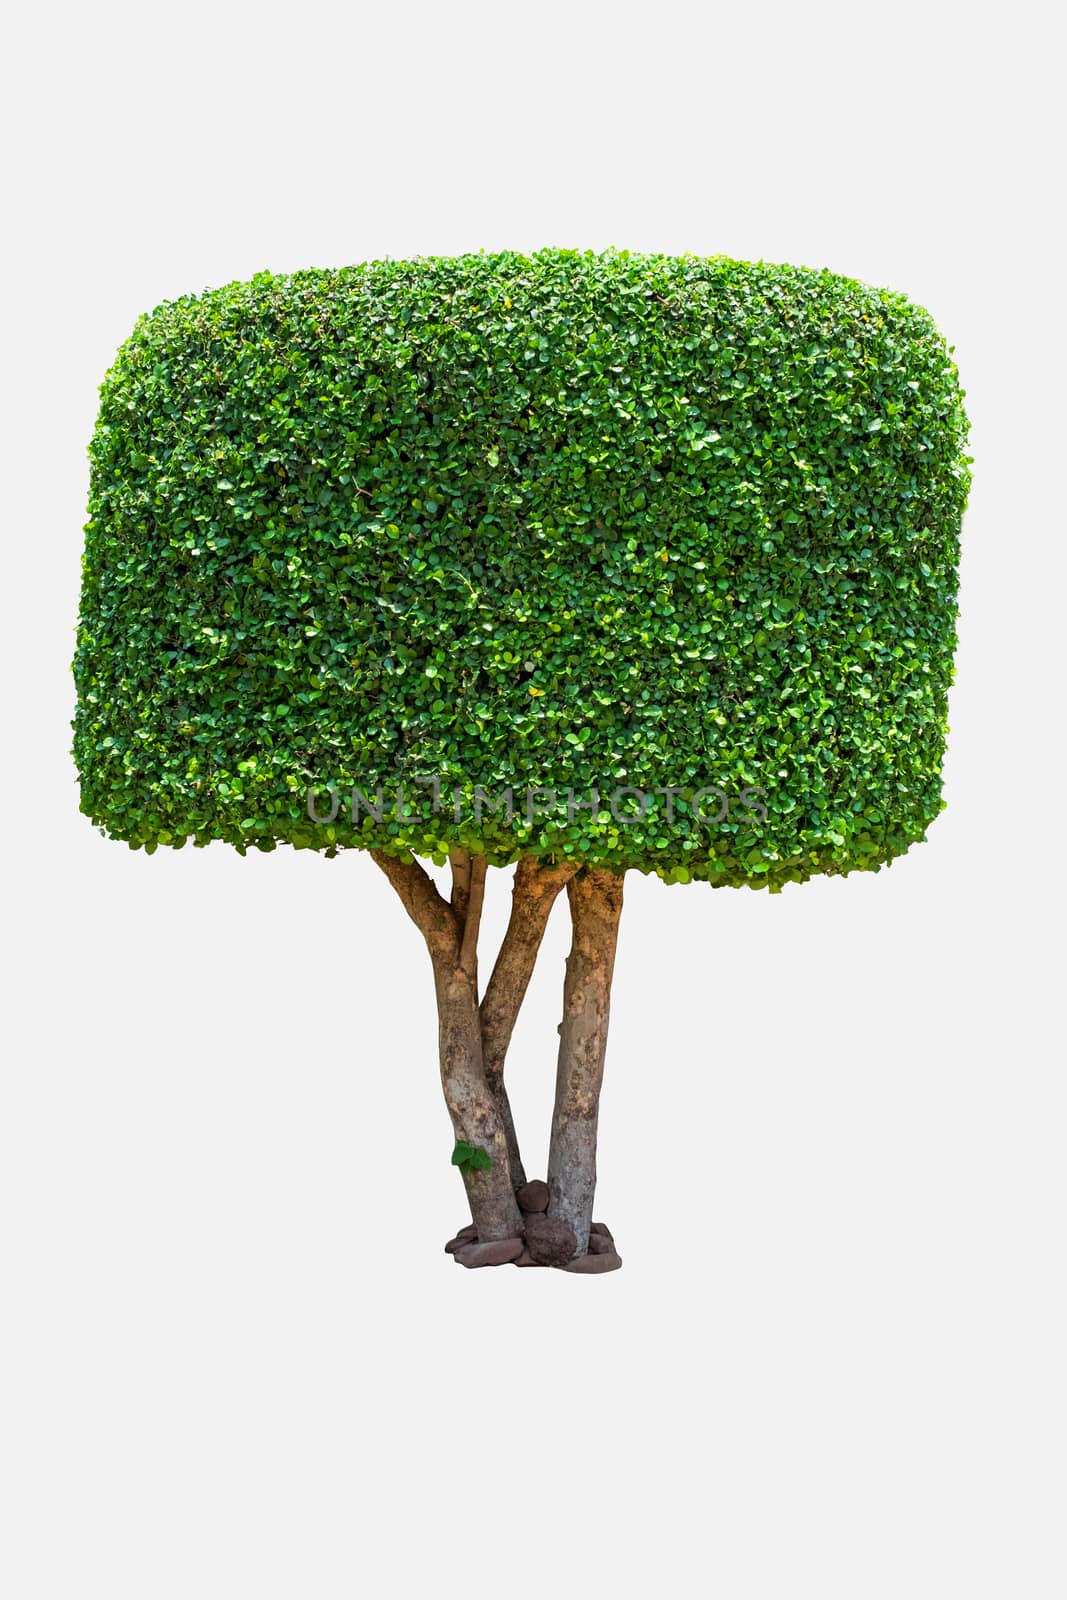 tree square isolate on white with clipping path  by Surasak